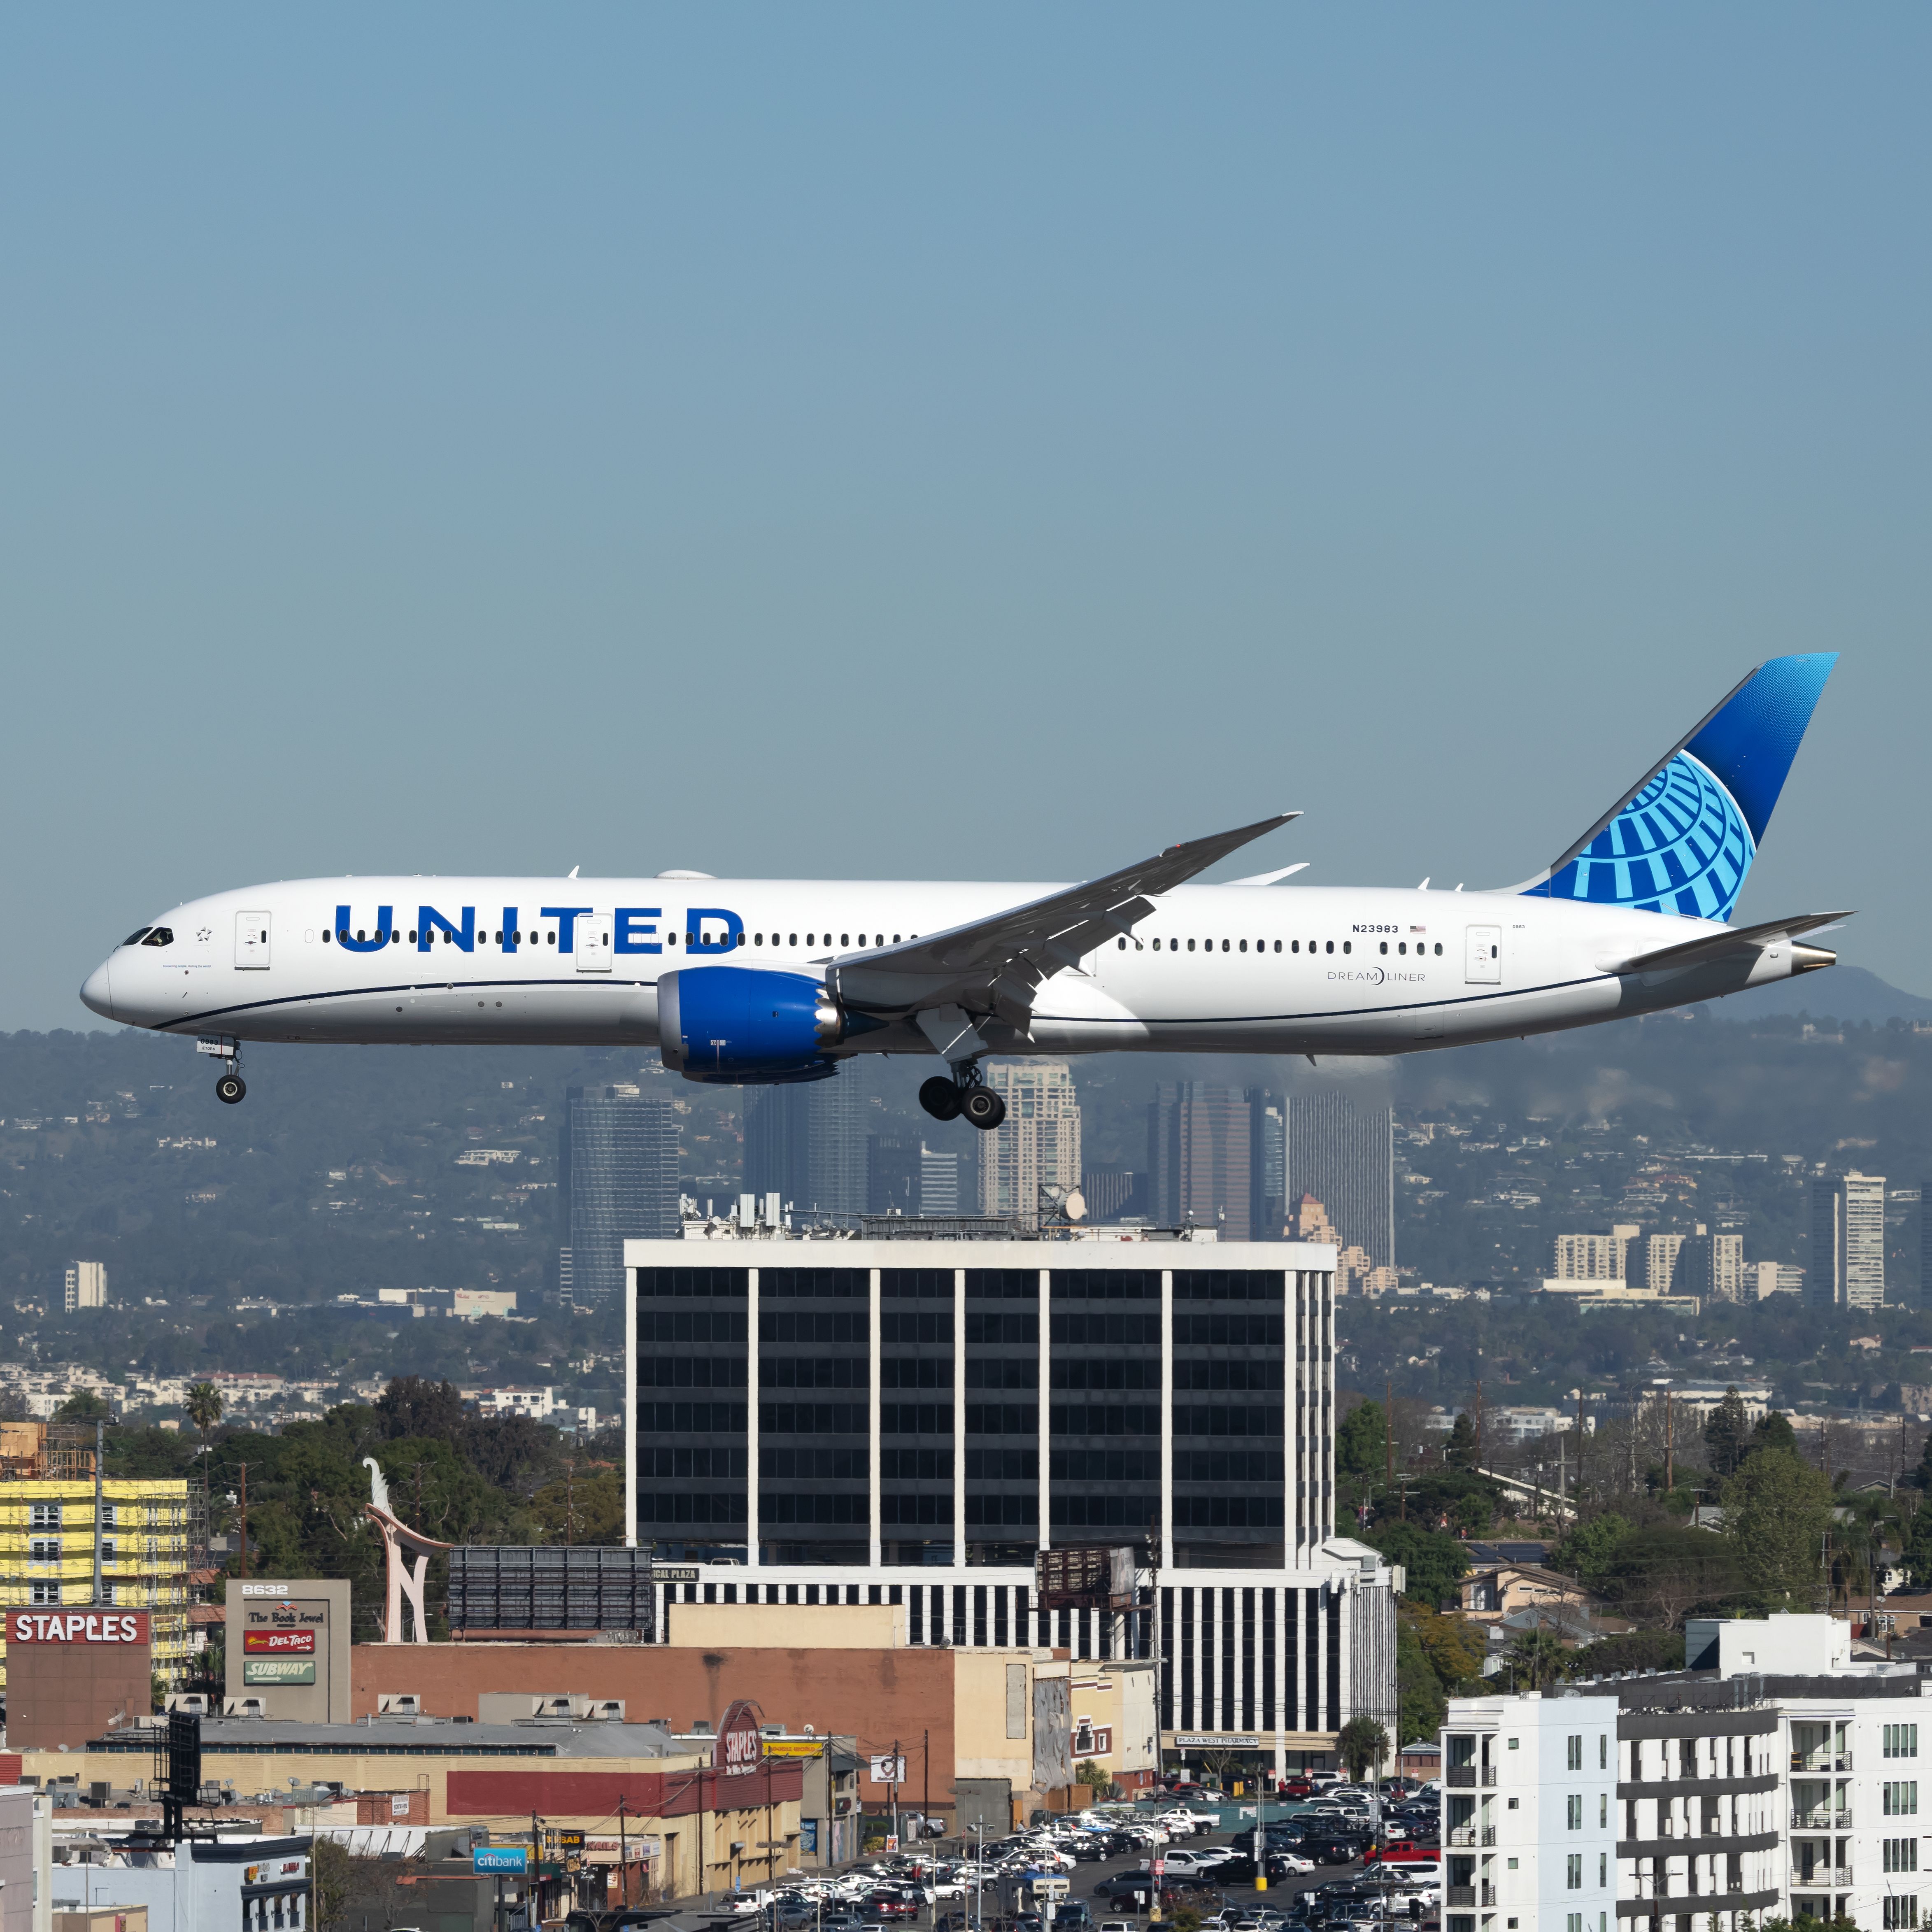 United United Airlines Boeing 787-9 Dreamliner on approach at Los Angeles International Airport.